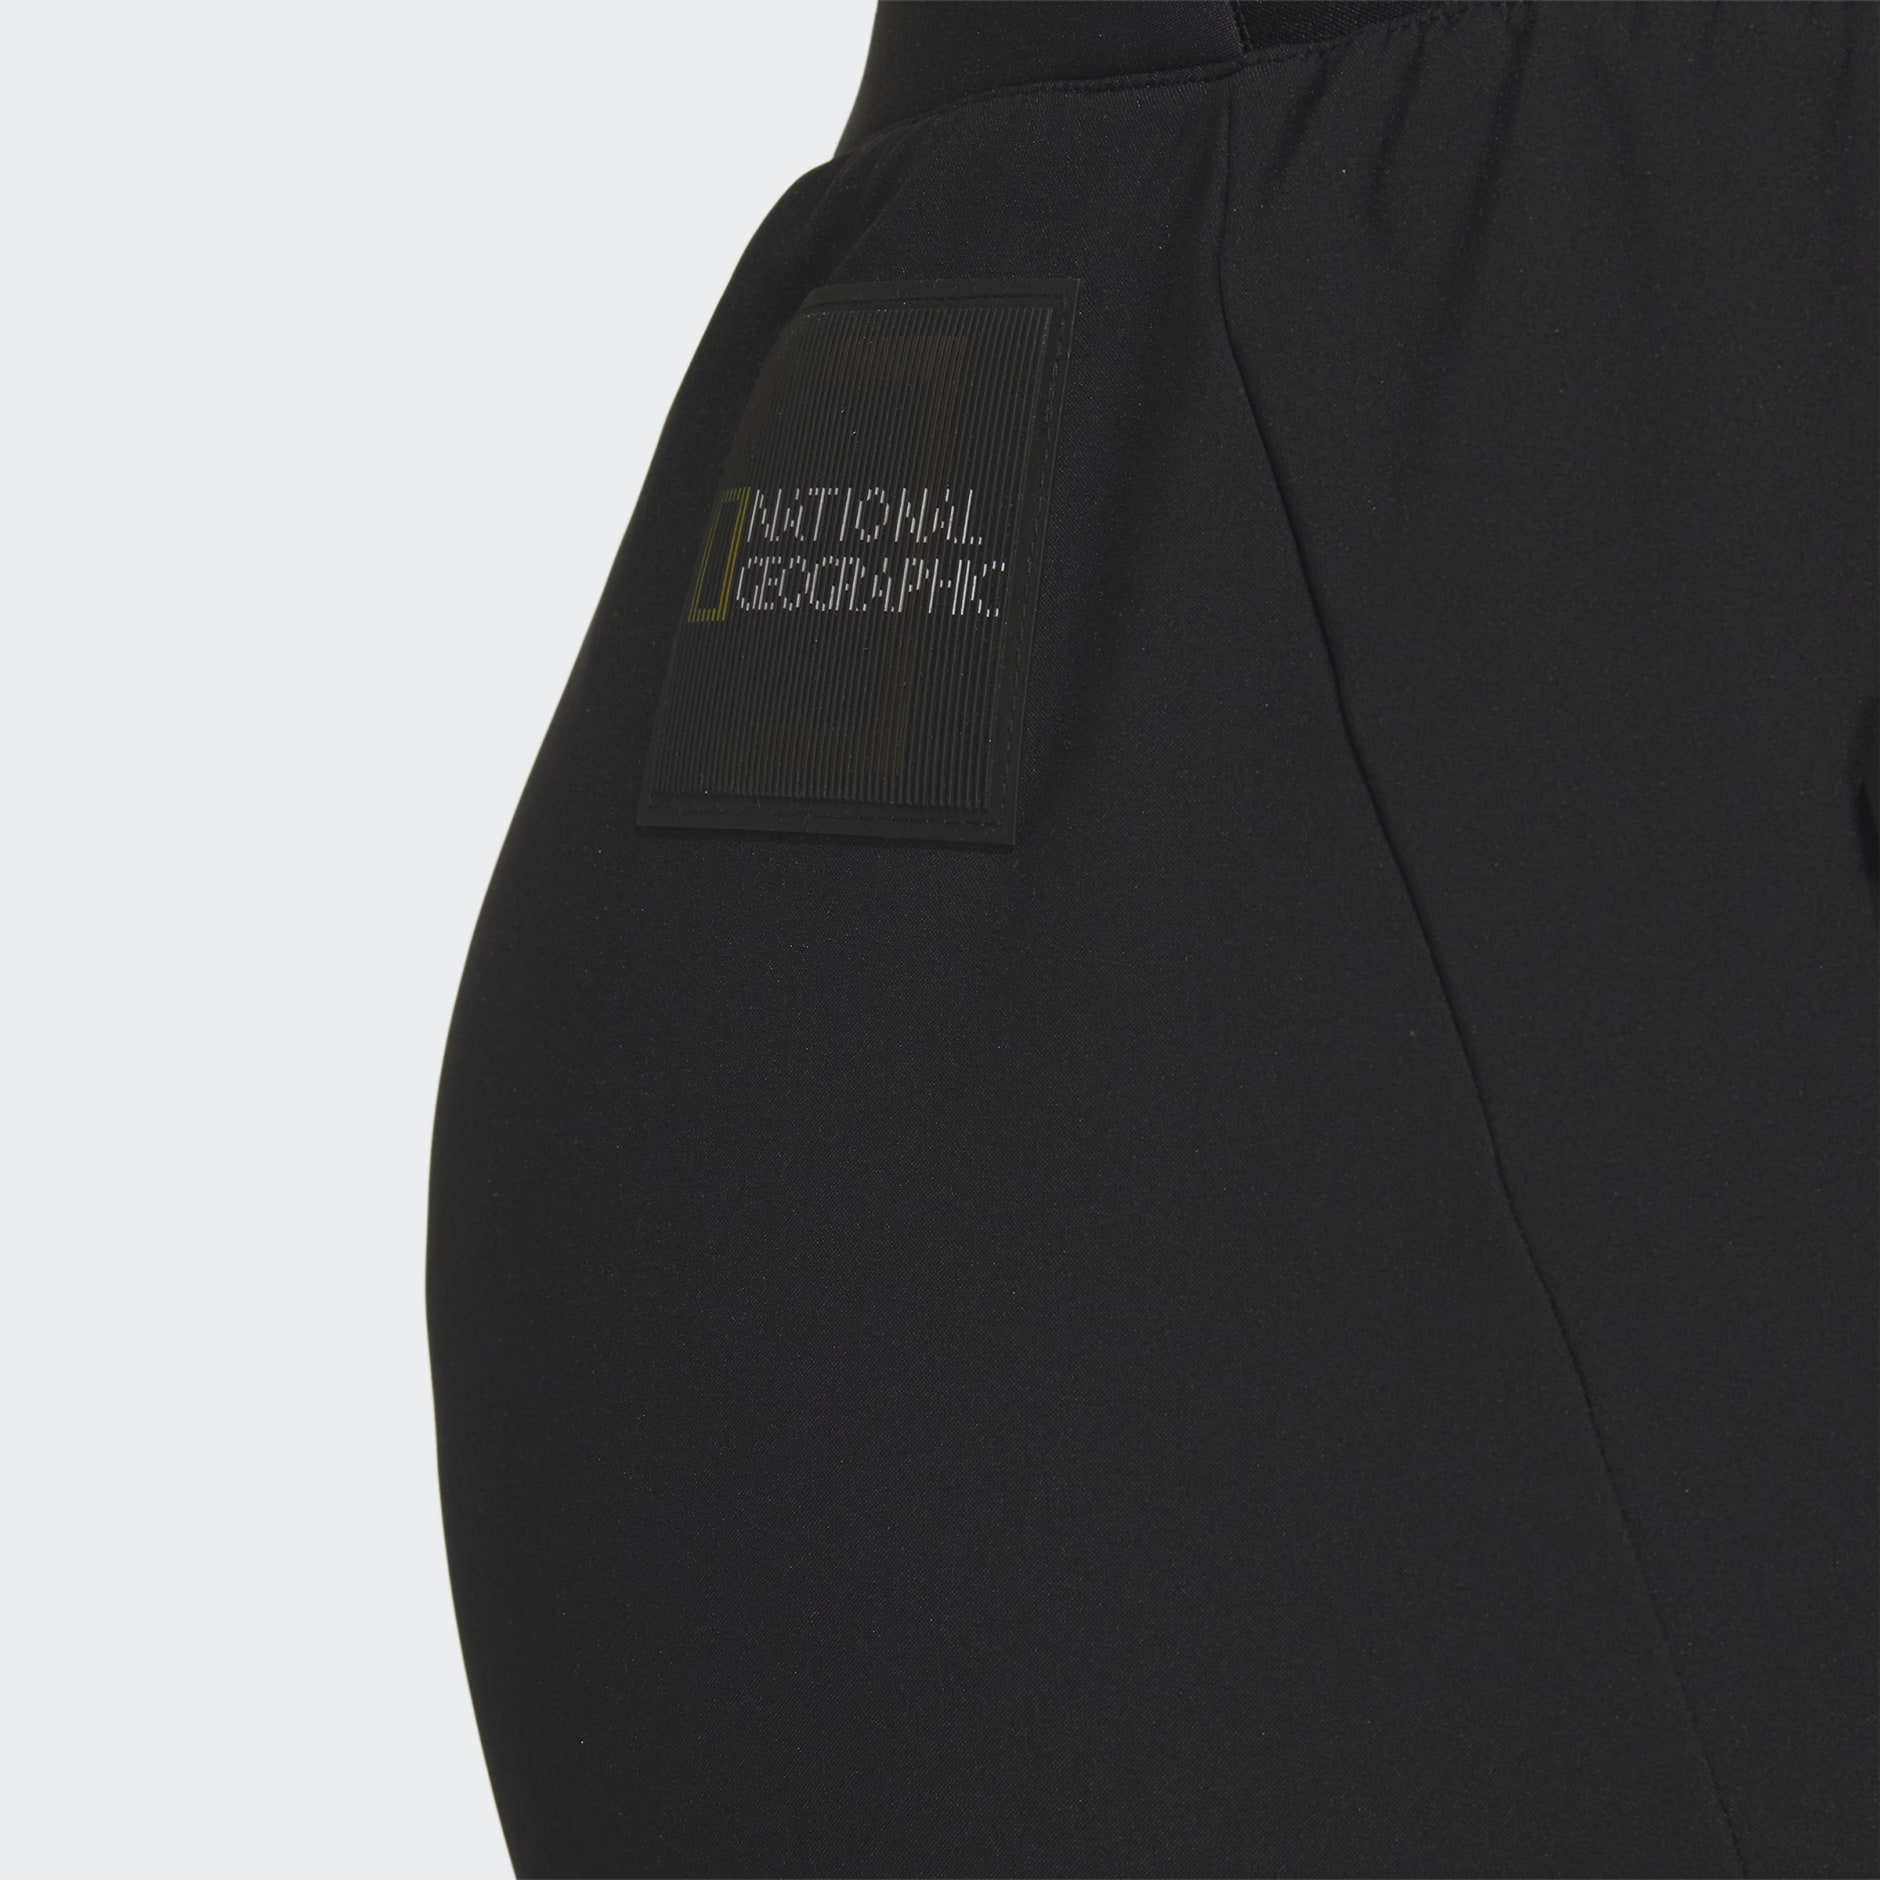 PVC Track Pants S-4XL, Black-White (NOW WITH POCKETS)